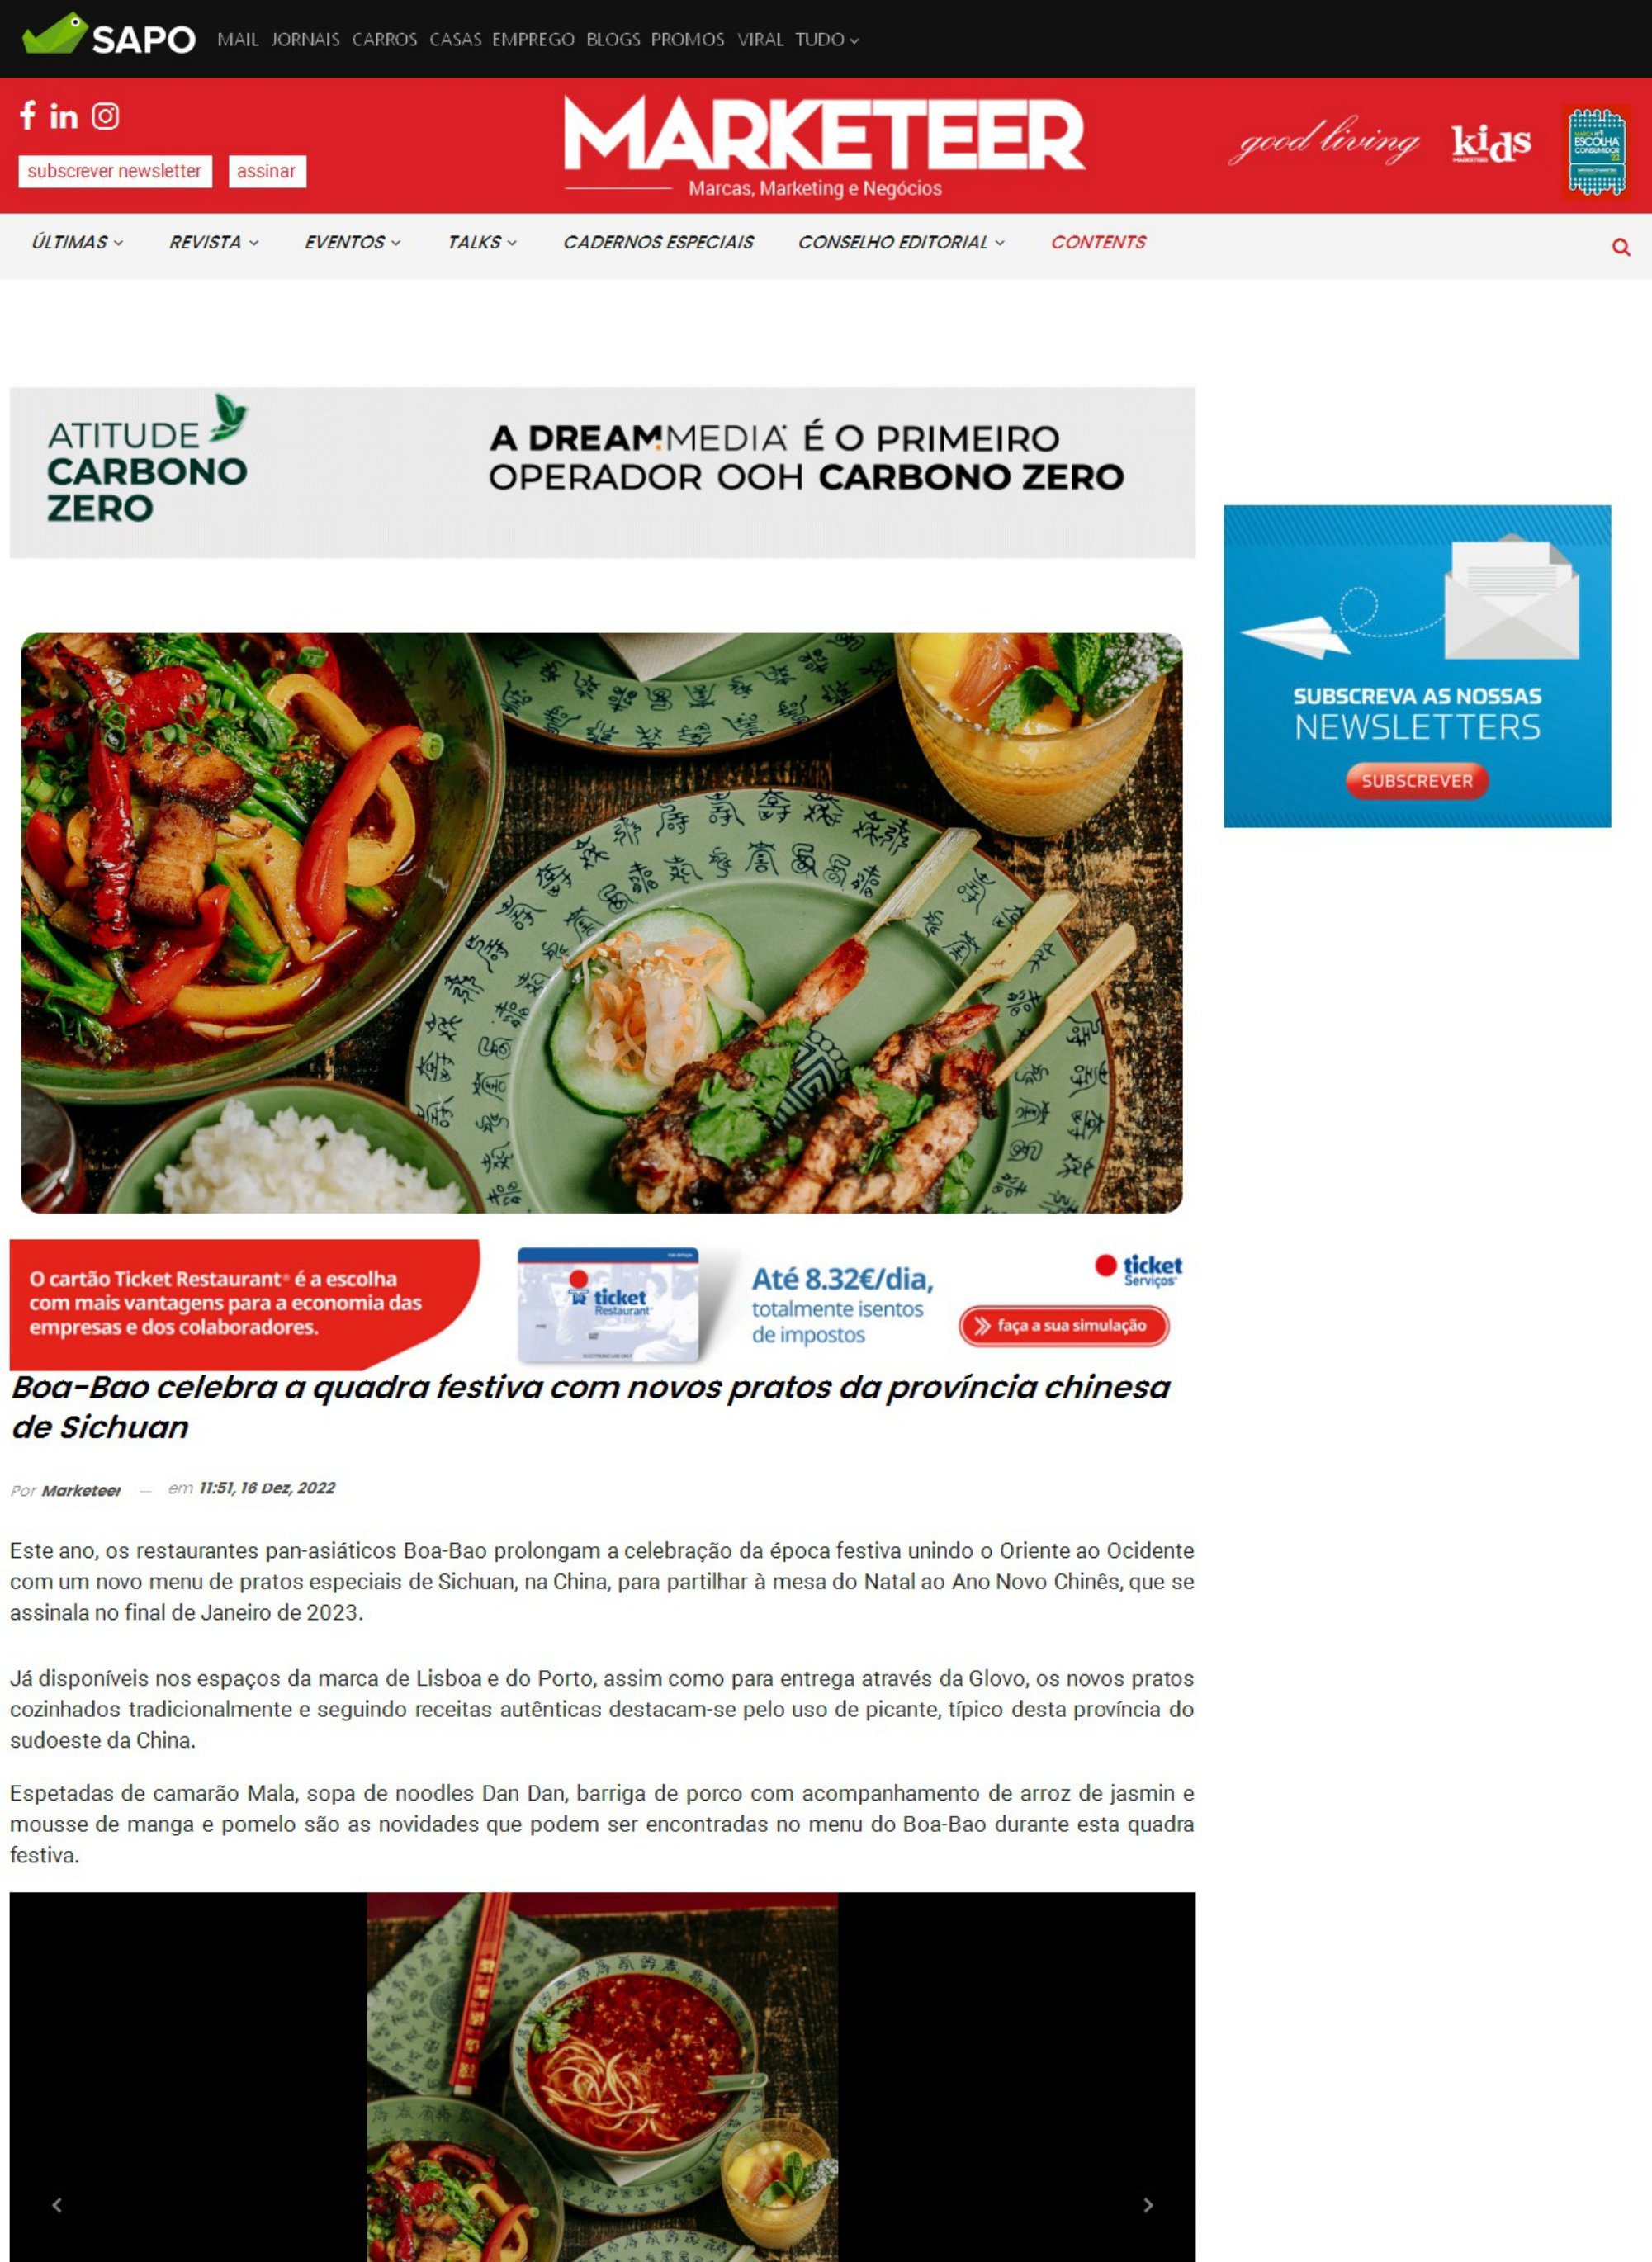 Marketeer Online_Boa-Bao celebrates the festive season with new dishes from the Chinese province of Sichuan_page-0001.jpg